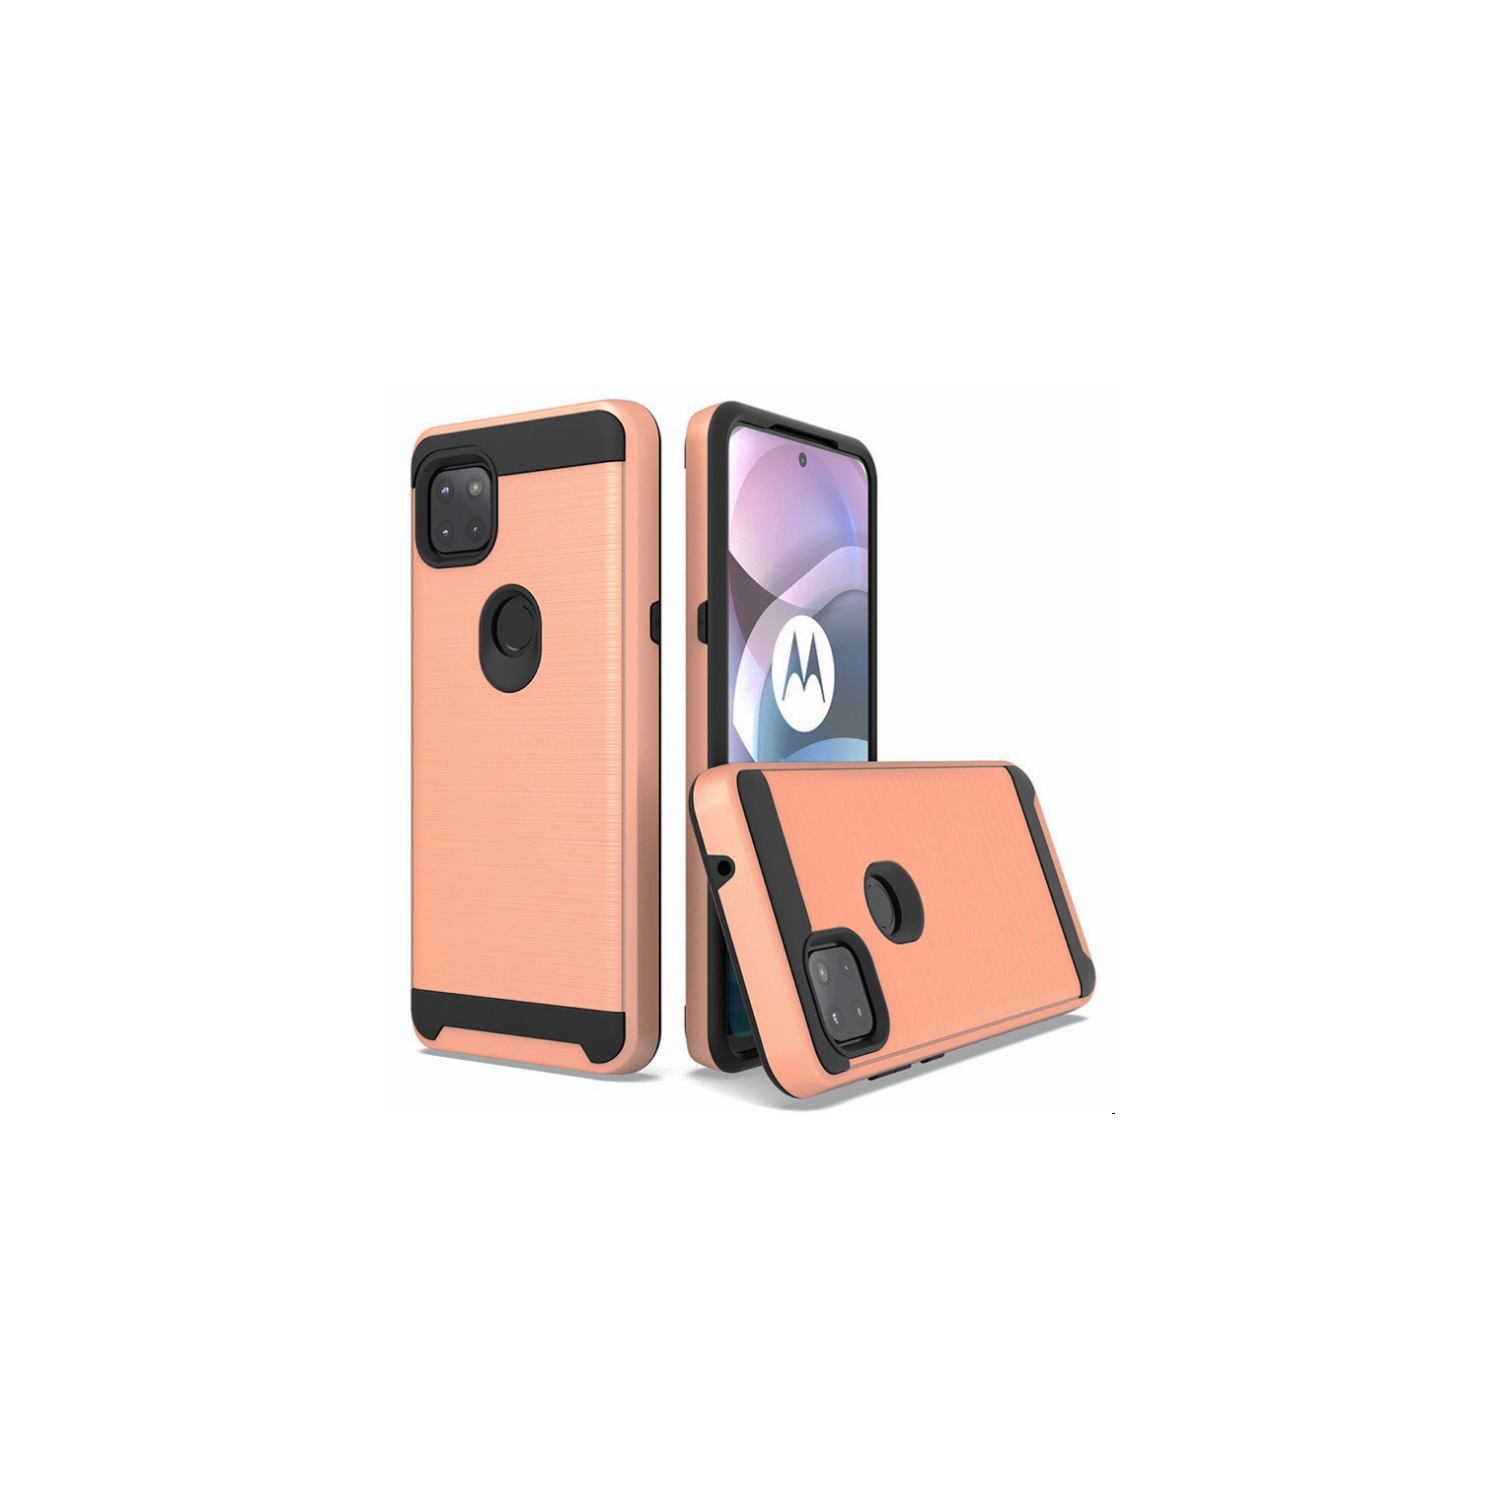 TopSave Blushed Texture PC+TPU Hard Rugged Cover Case For Motorola Moto One 5G Ace 6.7", Rose Gold